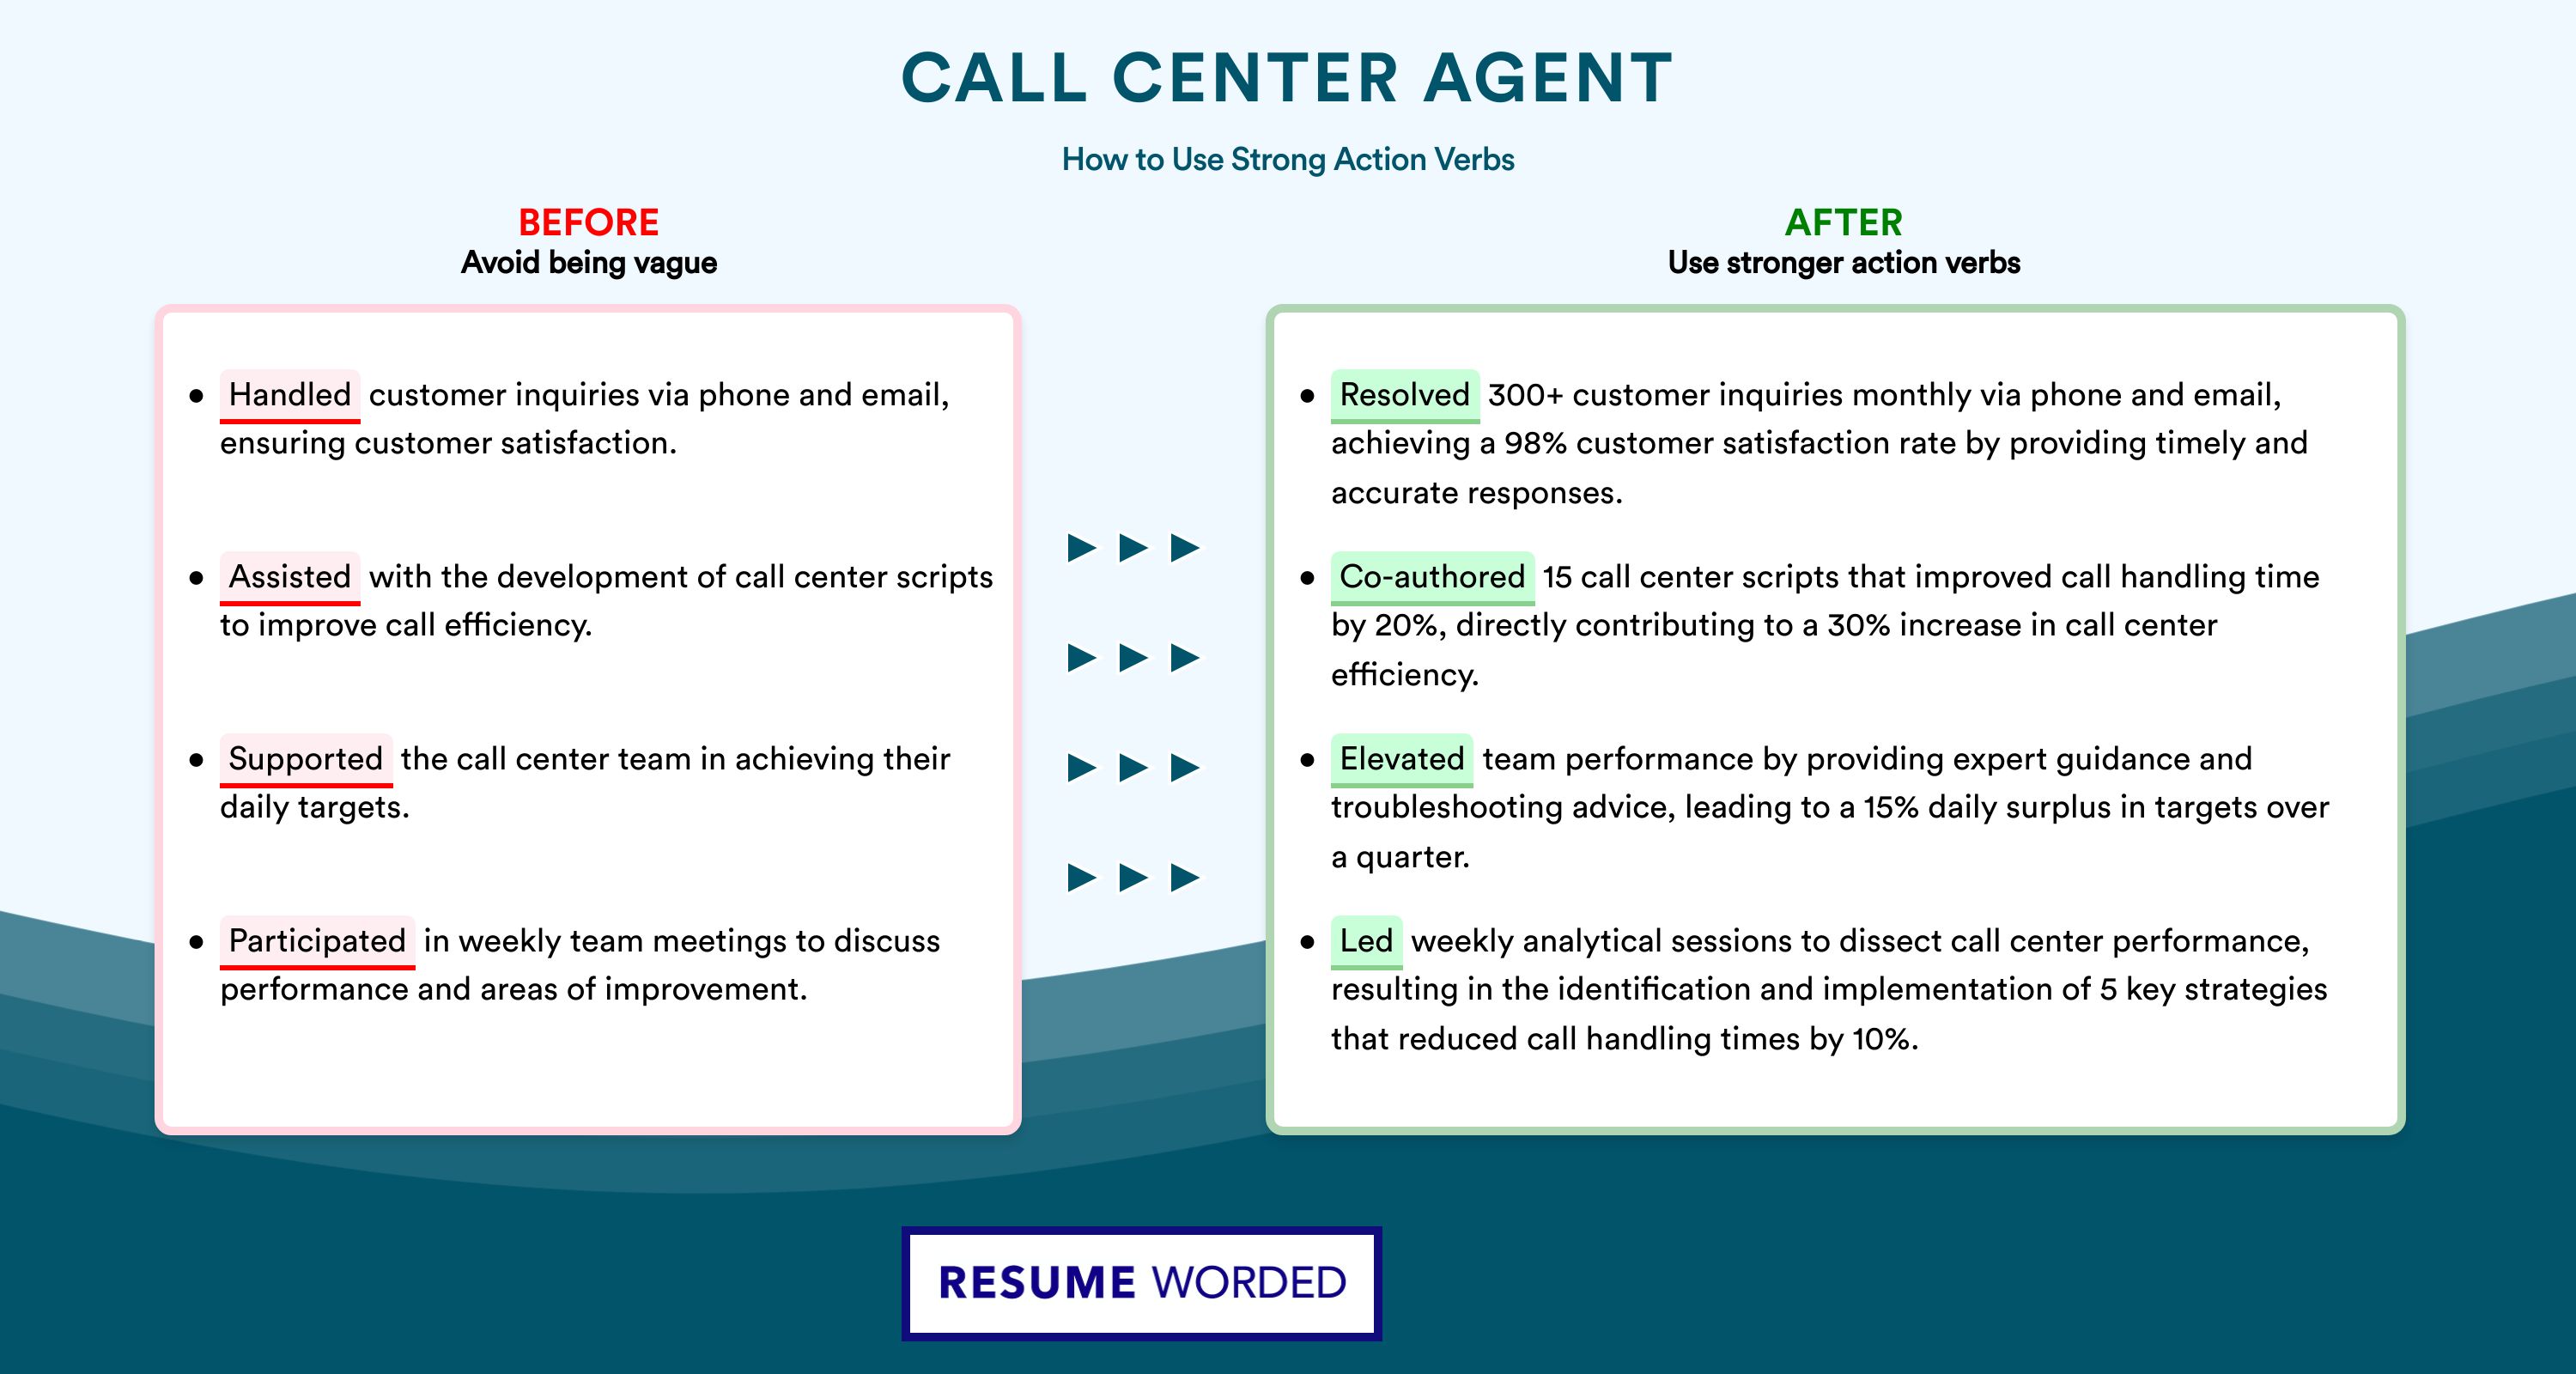 Action Verbs for Call Center Agent